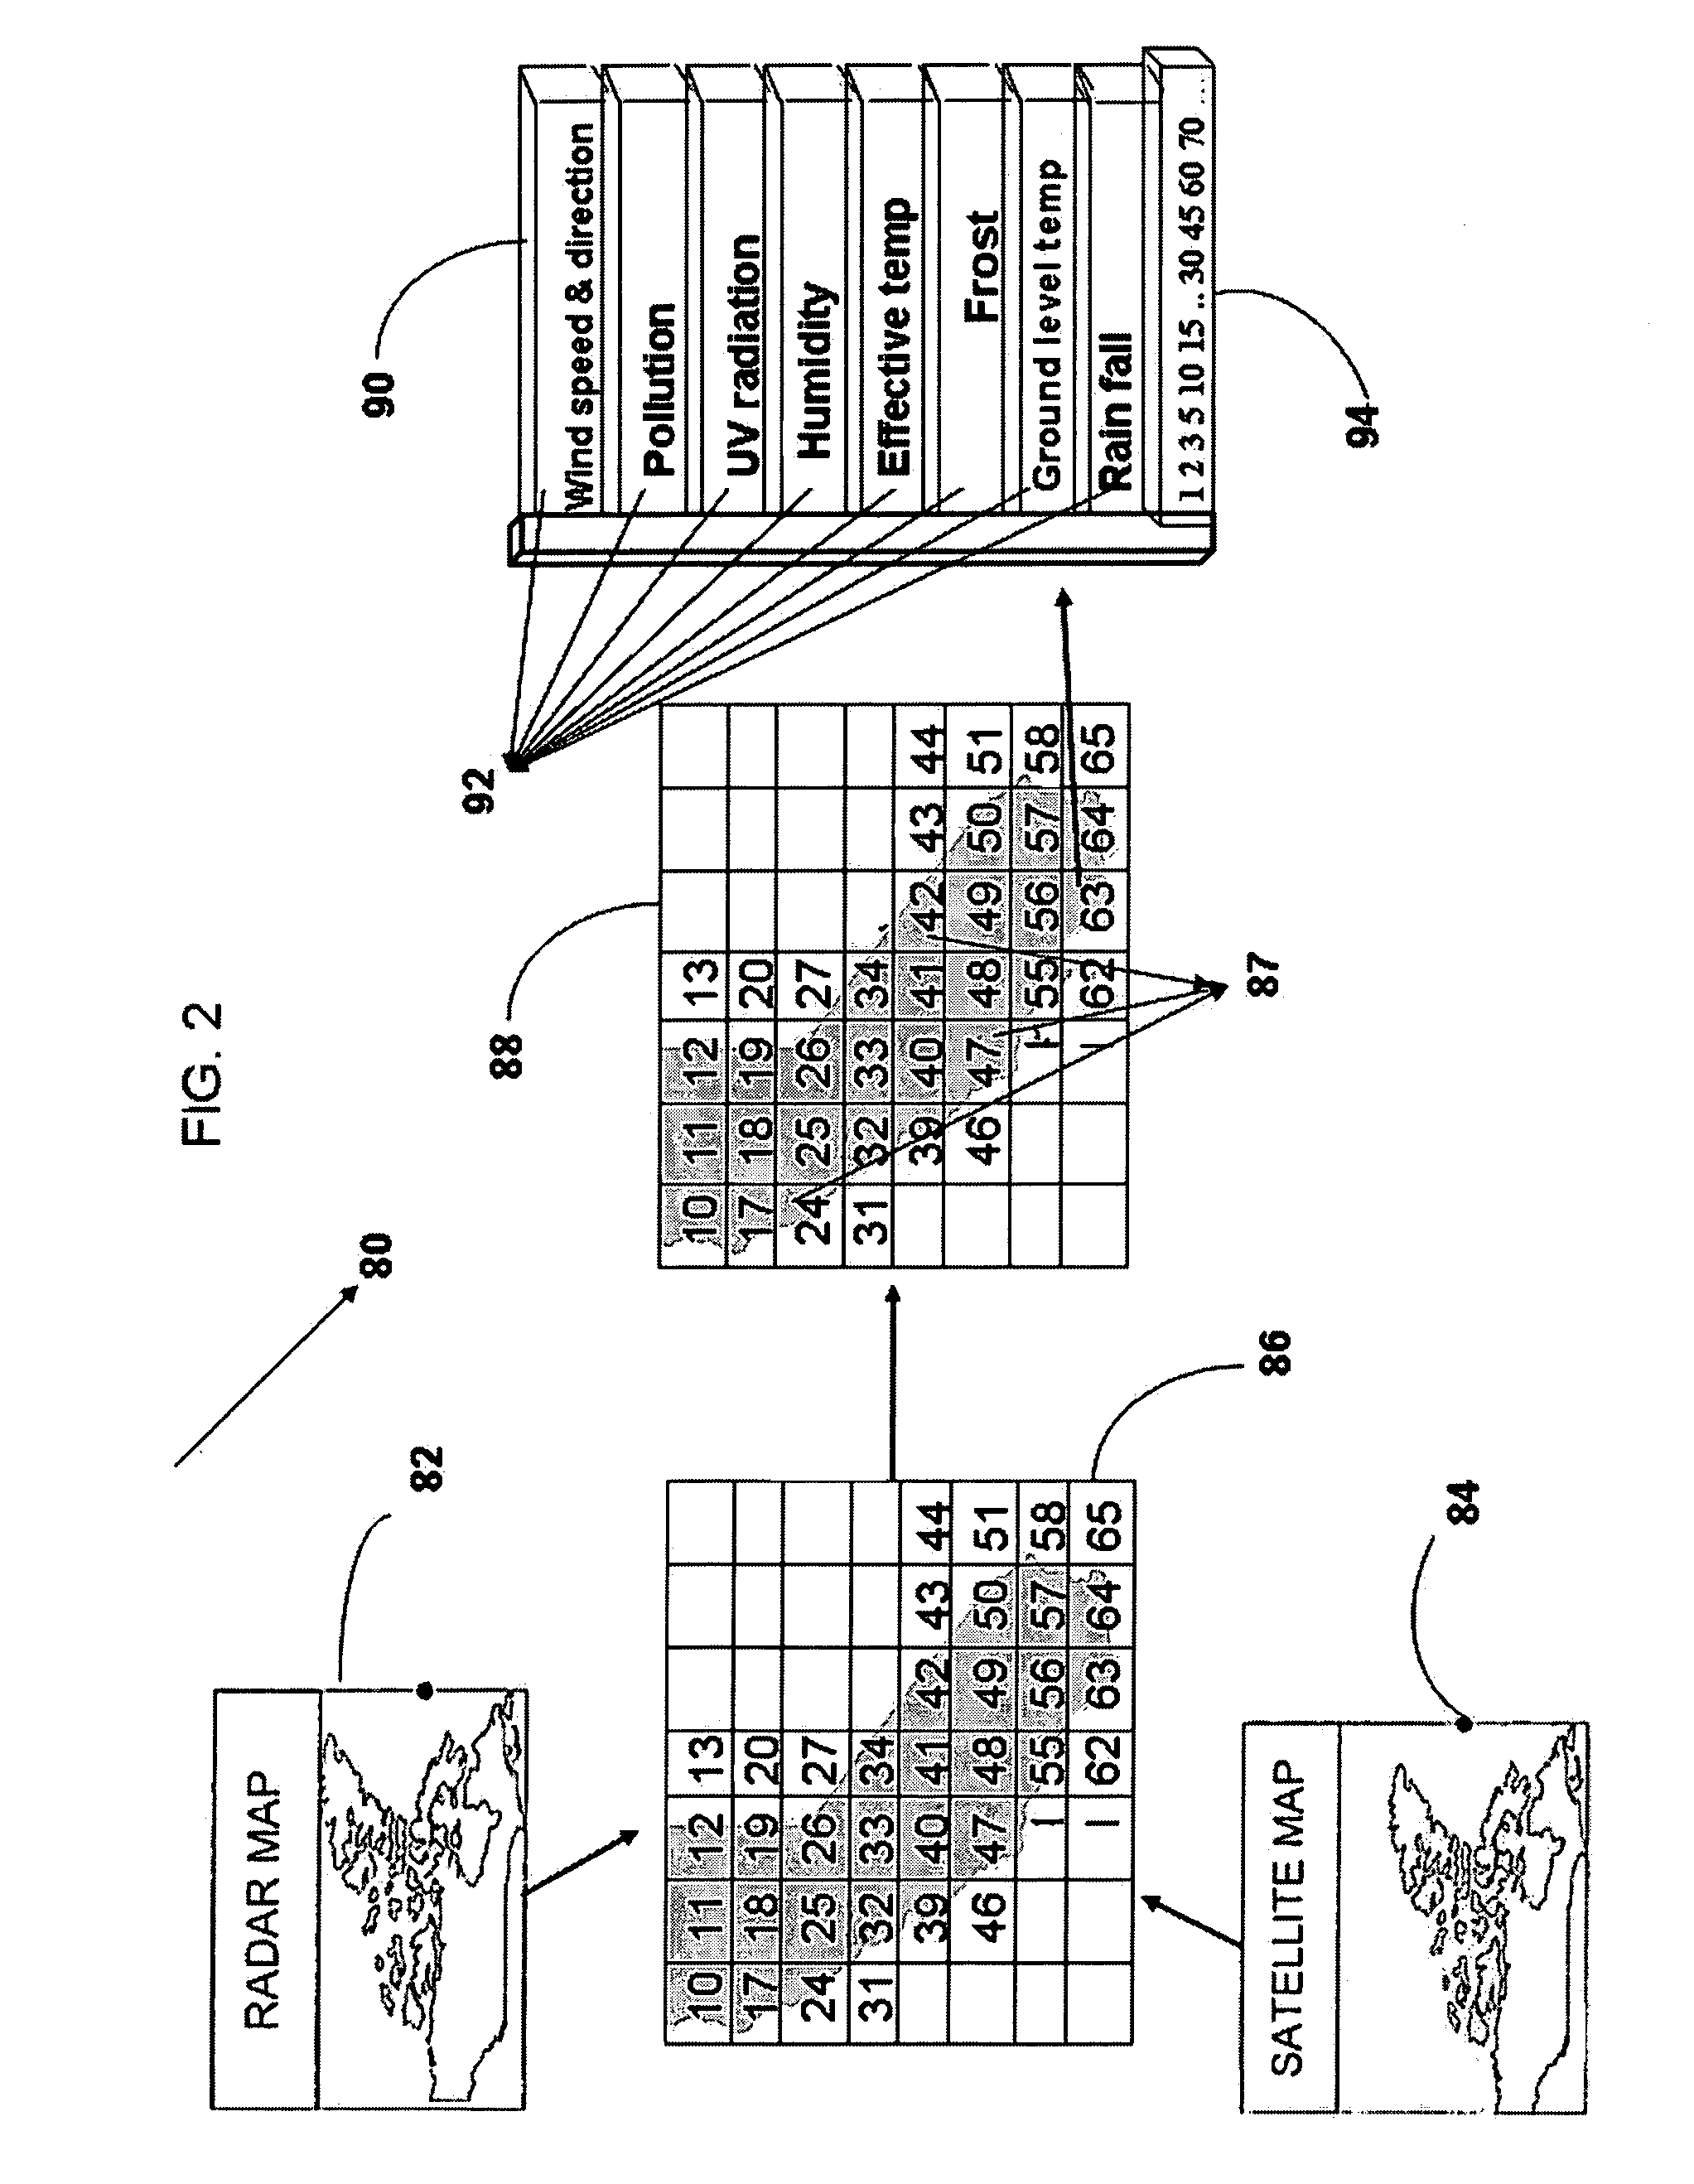 Location-based weather nowcast system and method